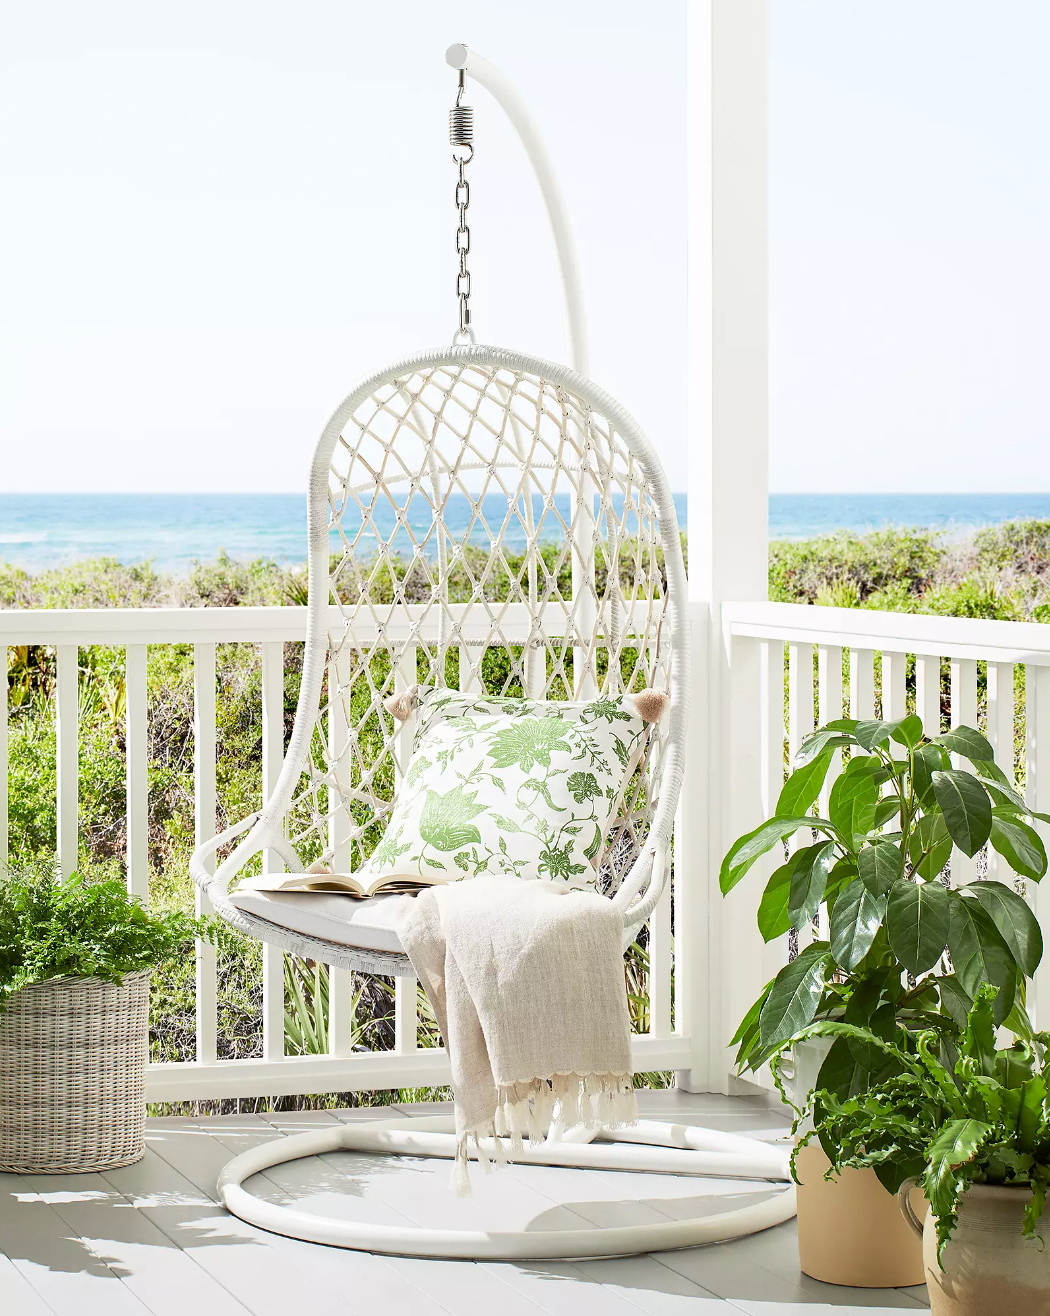 The 20 Best Outdoor Hanging Chairs for the Ultimate Summer Relaxation